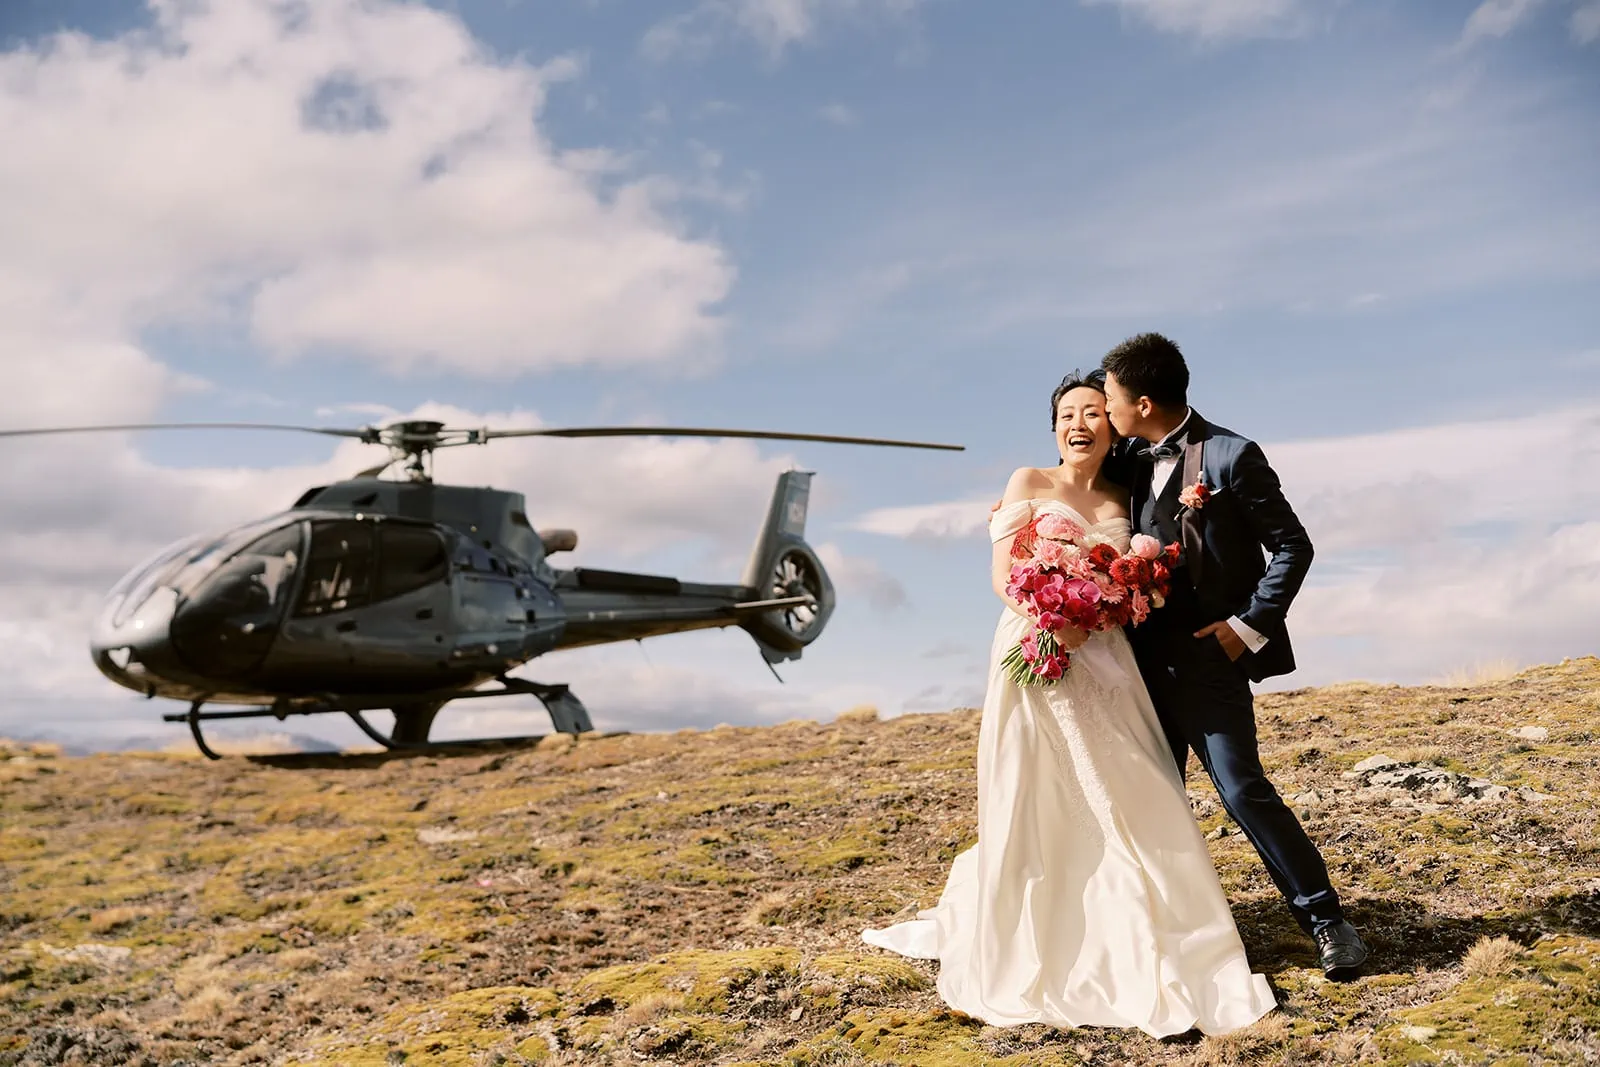 Queenstown Elopement Heli Wedding Photographer クイーンズタウン結婚式 | Pre-wedding photoshoot of a bride and groom standing in front of a helicopter.